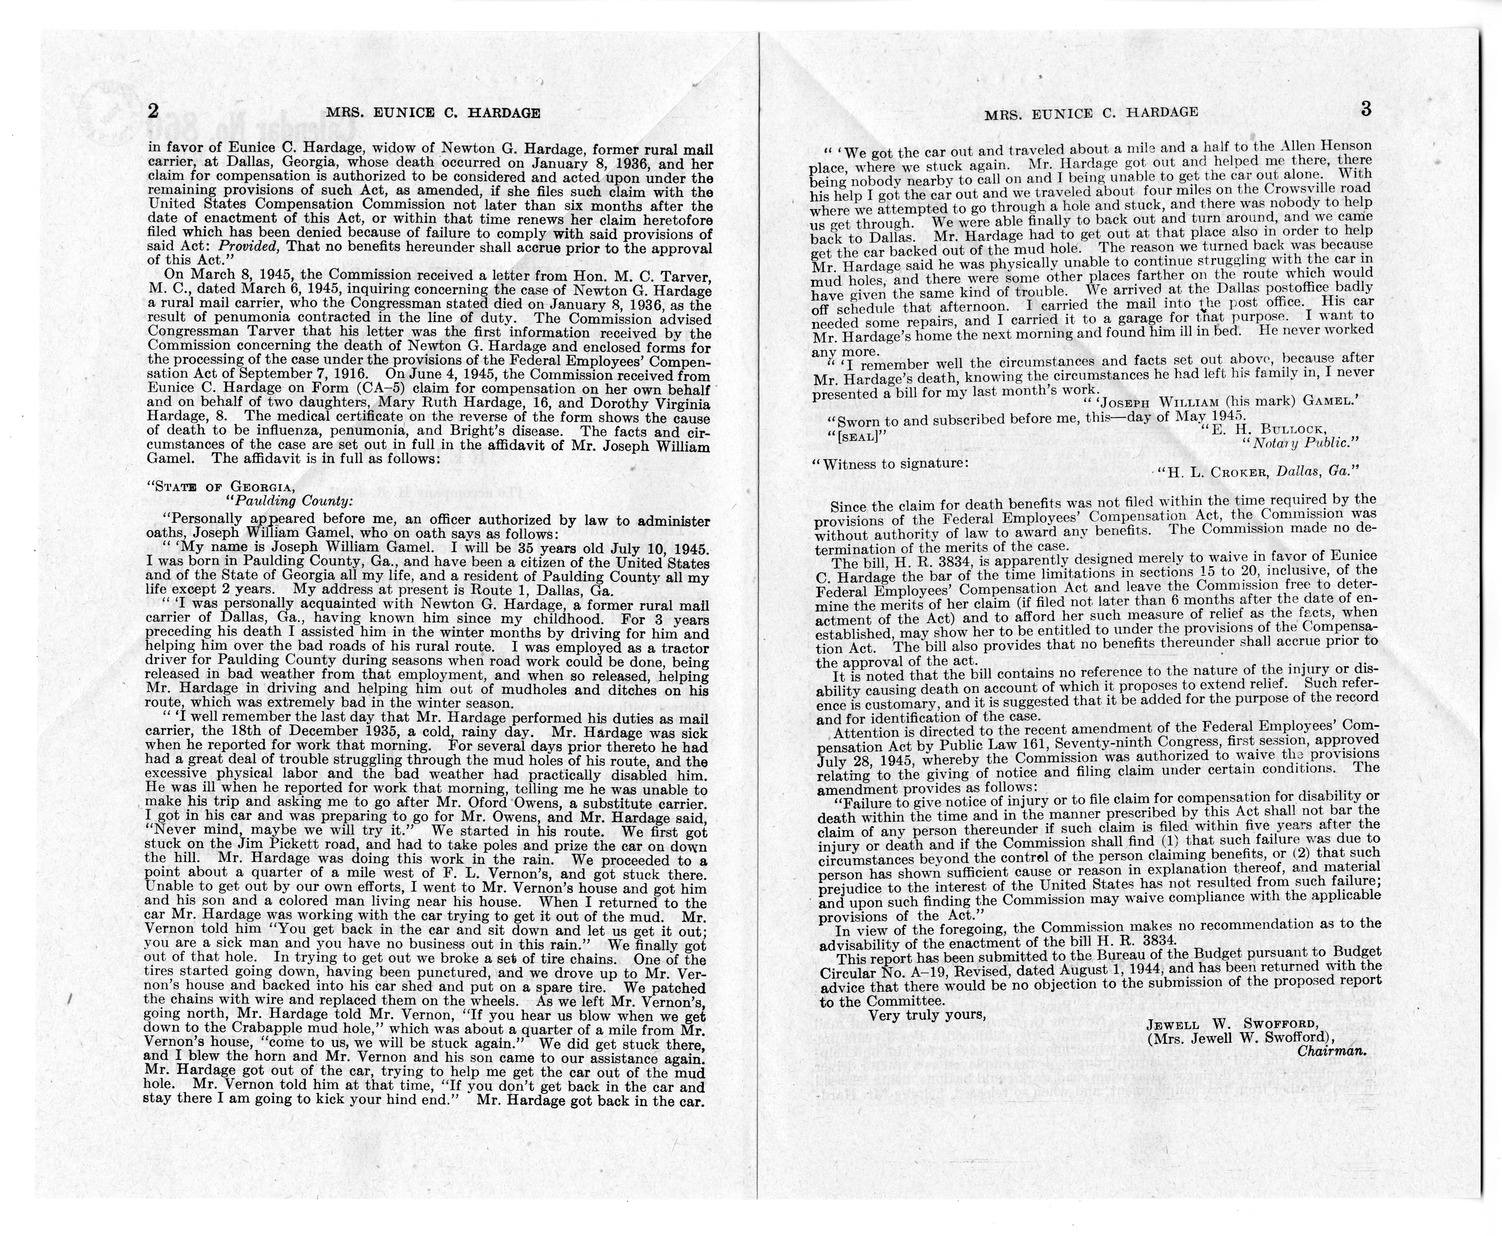 Memorandum from Frederick J. Bailey to M. C. Latta, H.R. 3834, For the Relief of Mrs. Eunice C. Hardage, with Attachments